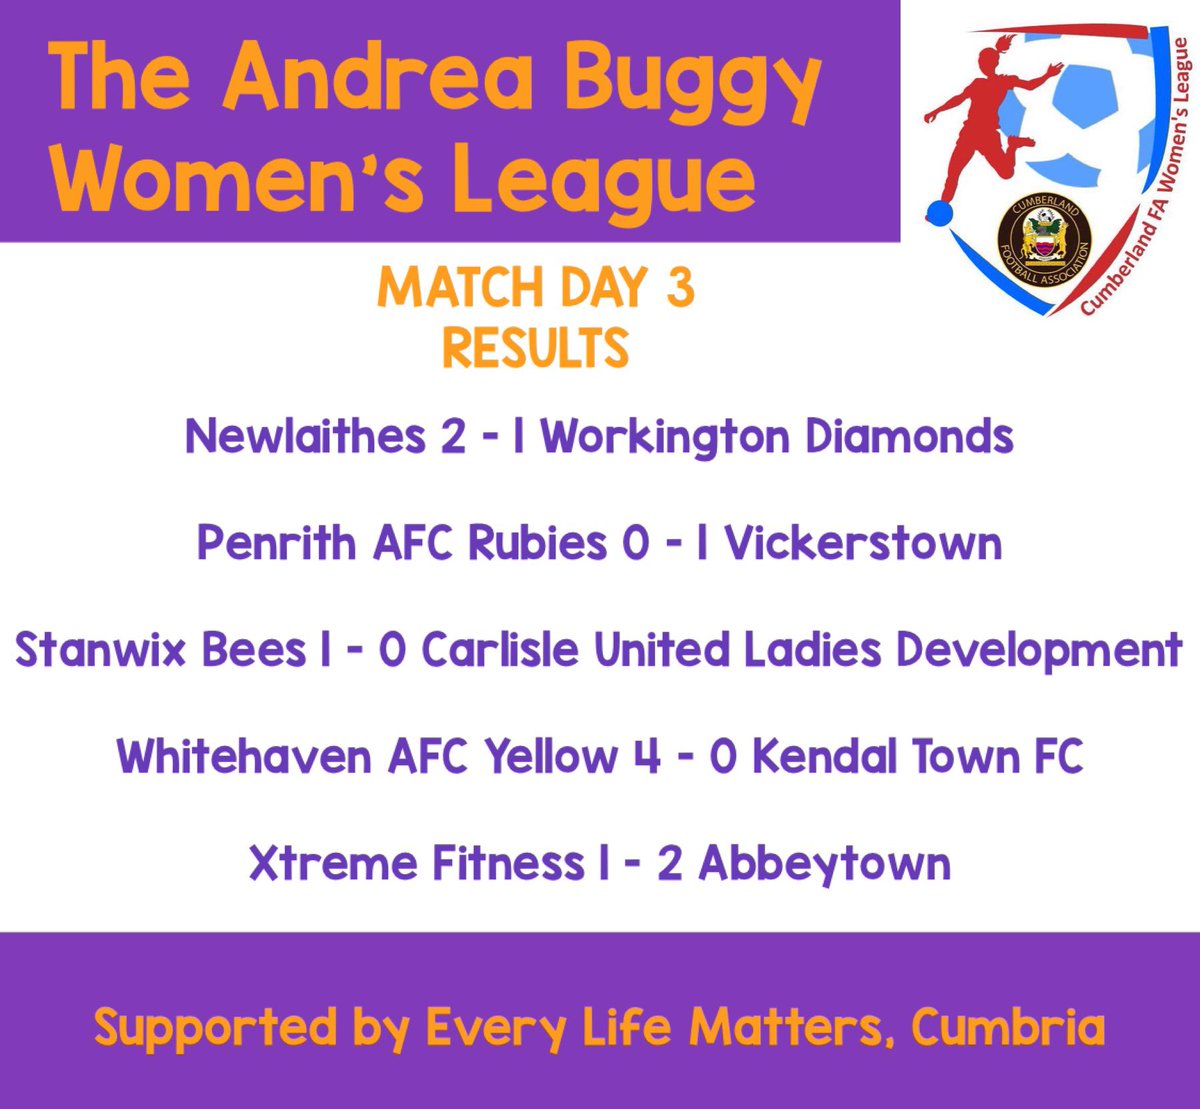 MATCH DAY 3 | This week’s Women’s League games! Keep up to date with what’s what… 👉bit.ly/ABL_Fixtures Results are in👇